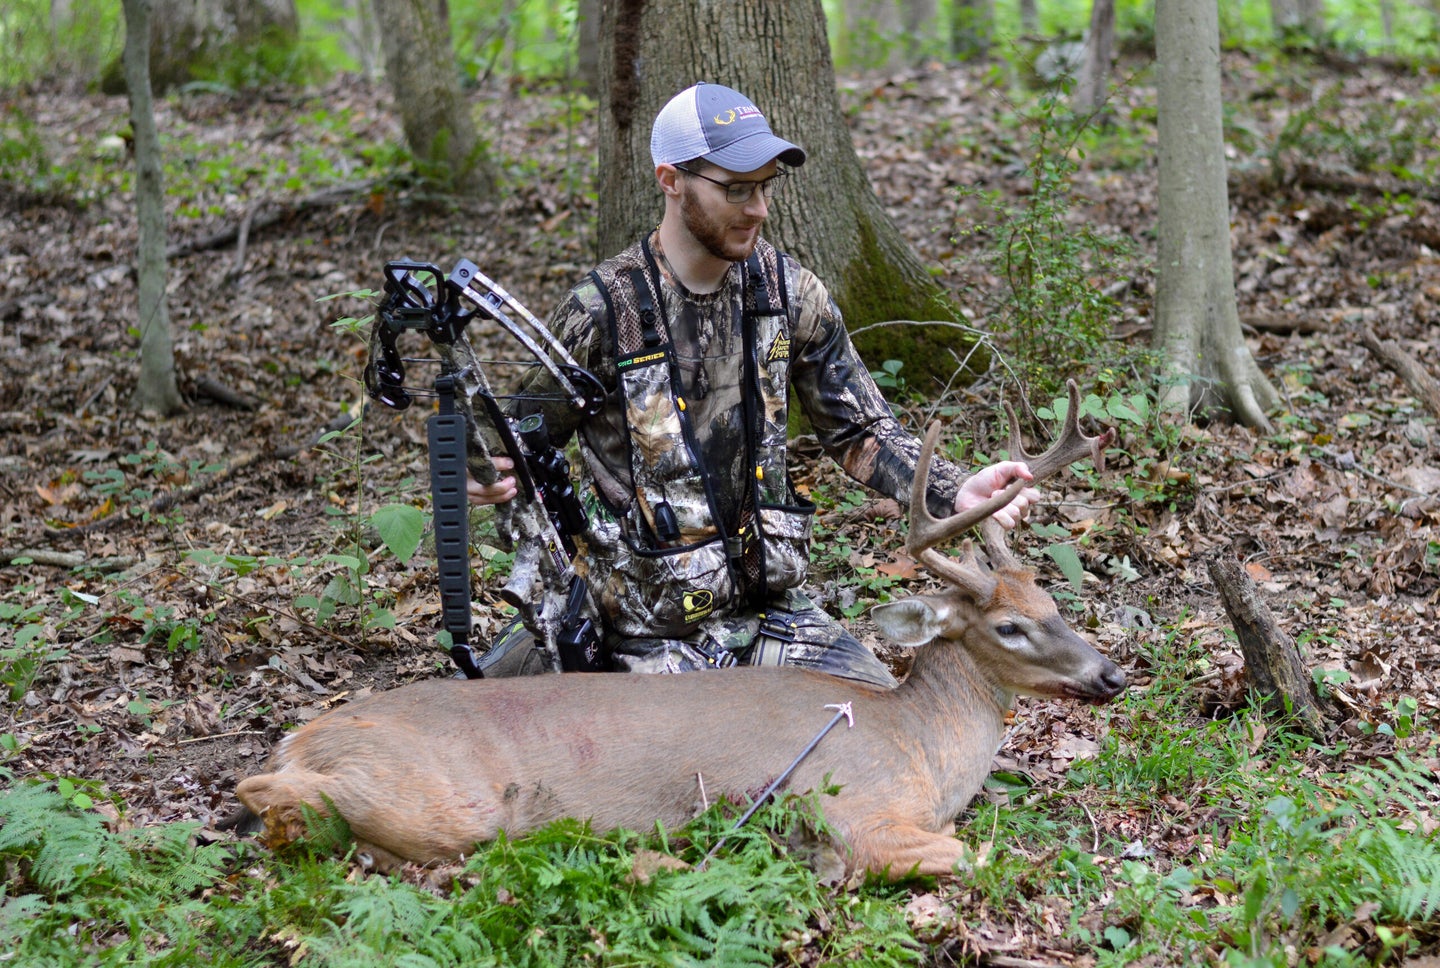 A deer hunter shot a whitetail deer with the Tenpoint Titan M1 crossbow